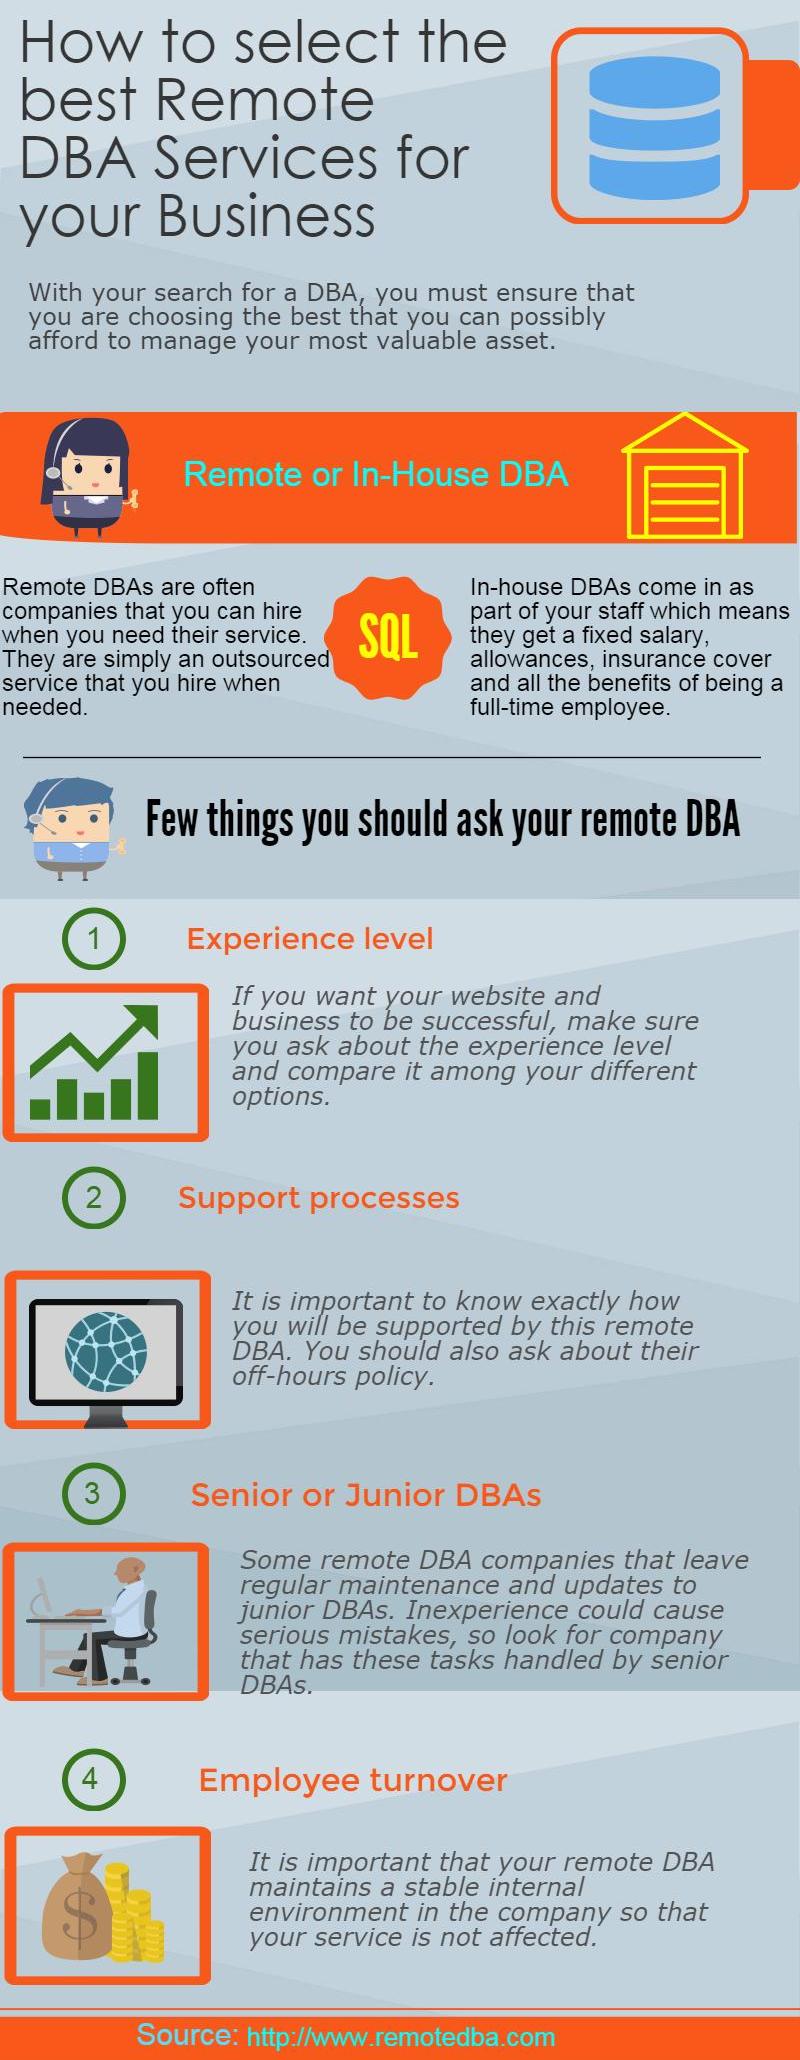 How to Select The Best Remote DBA Services for your Business